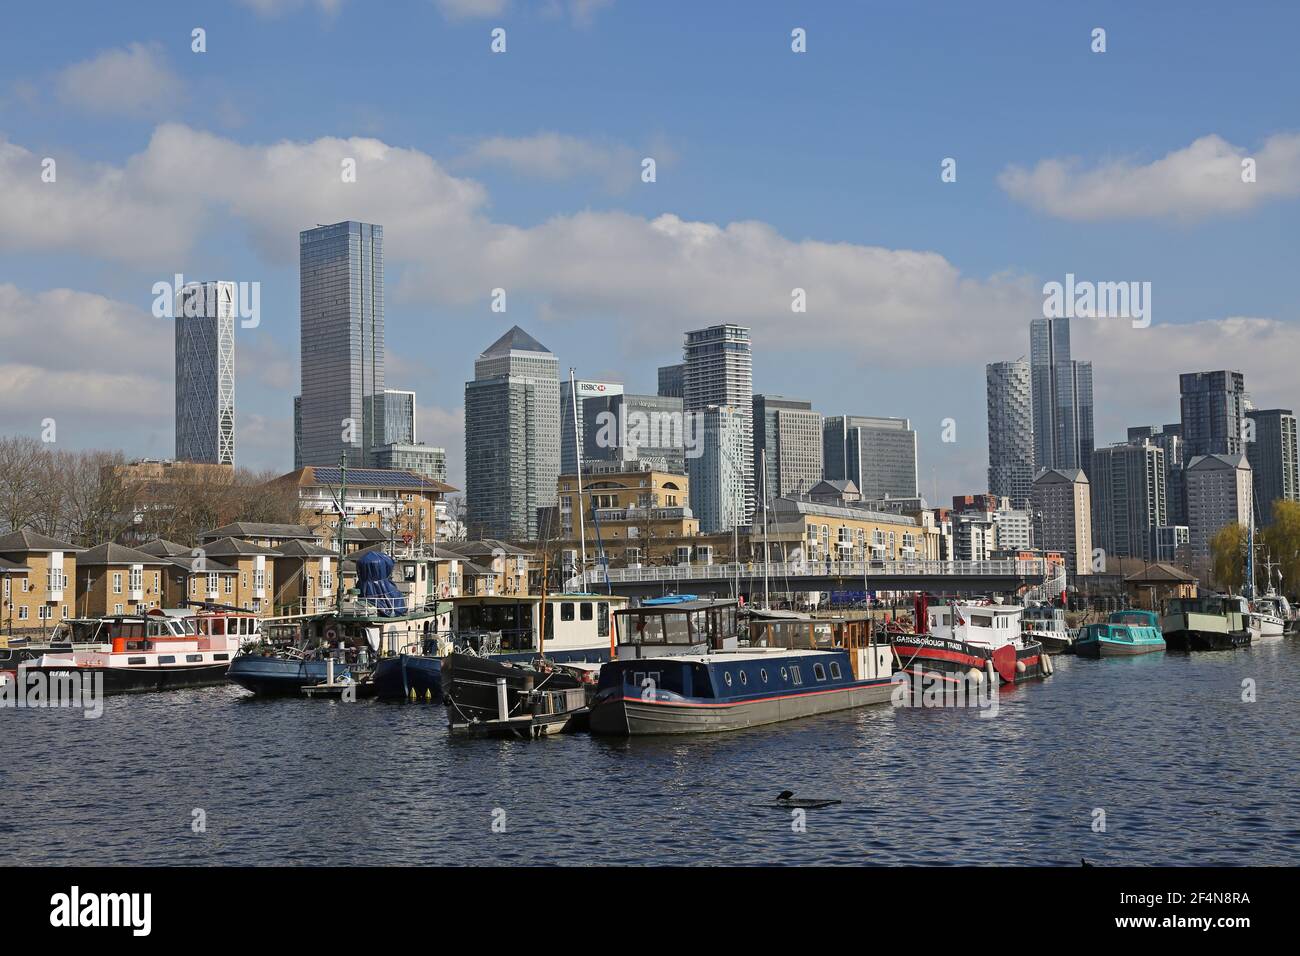 Houseboats in Greenland Dock, Rotherhithe, London, UK. Part of the  old Surrey Docks redeveloped in the 1980s. Canary Wharf towers in the background. Stock Photo